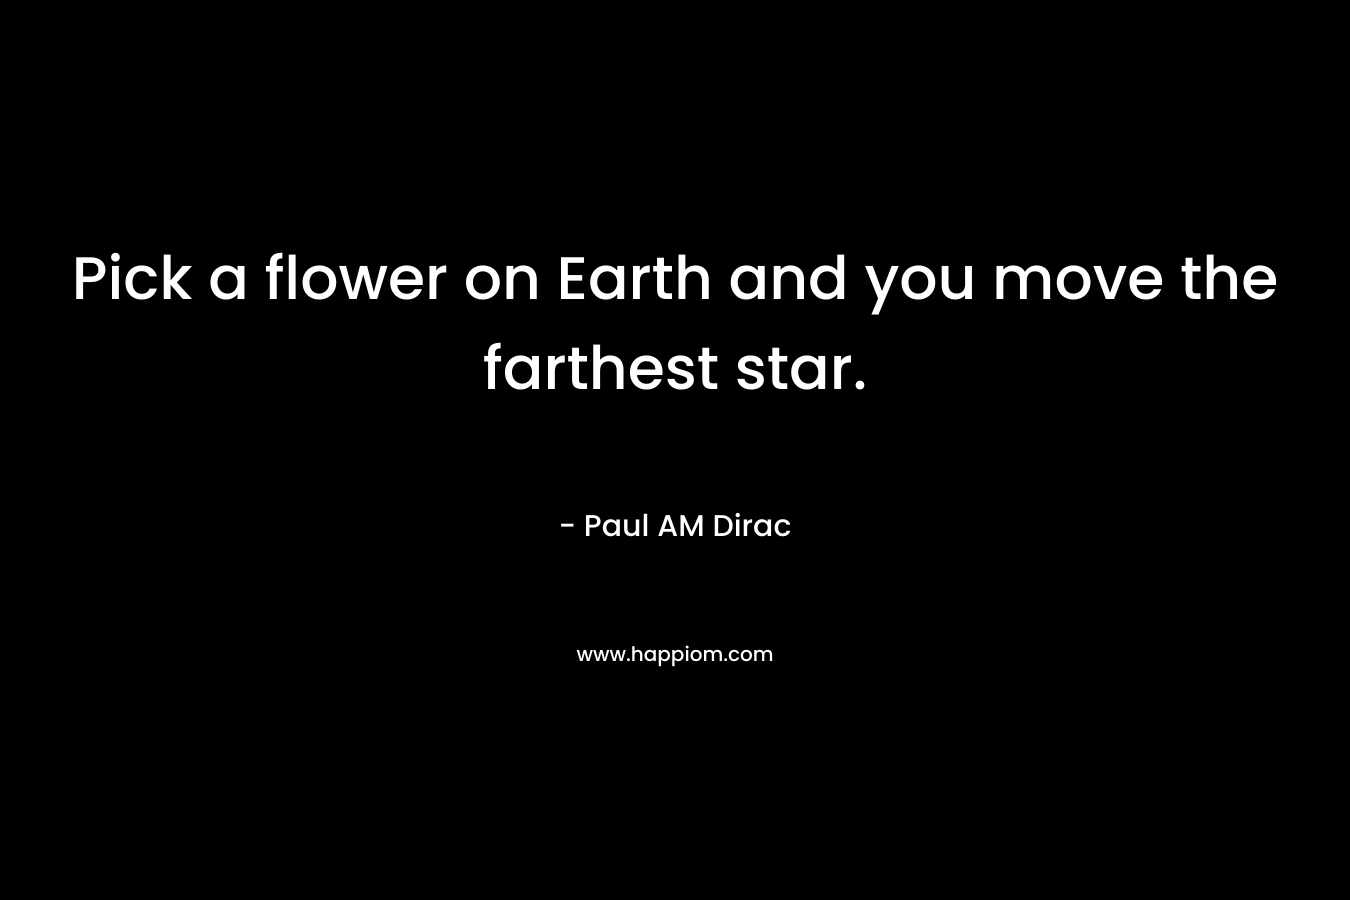 Pick a flower on Earth and you move the farthest star. – Paul AM Dirac